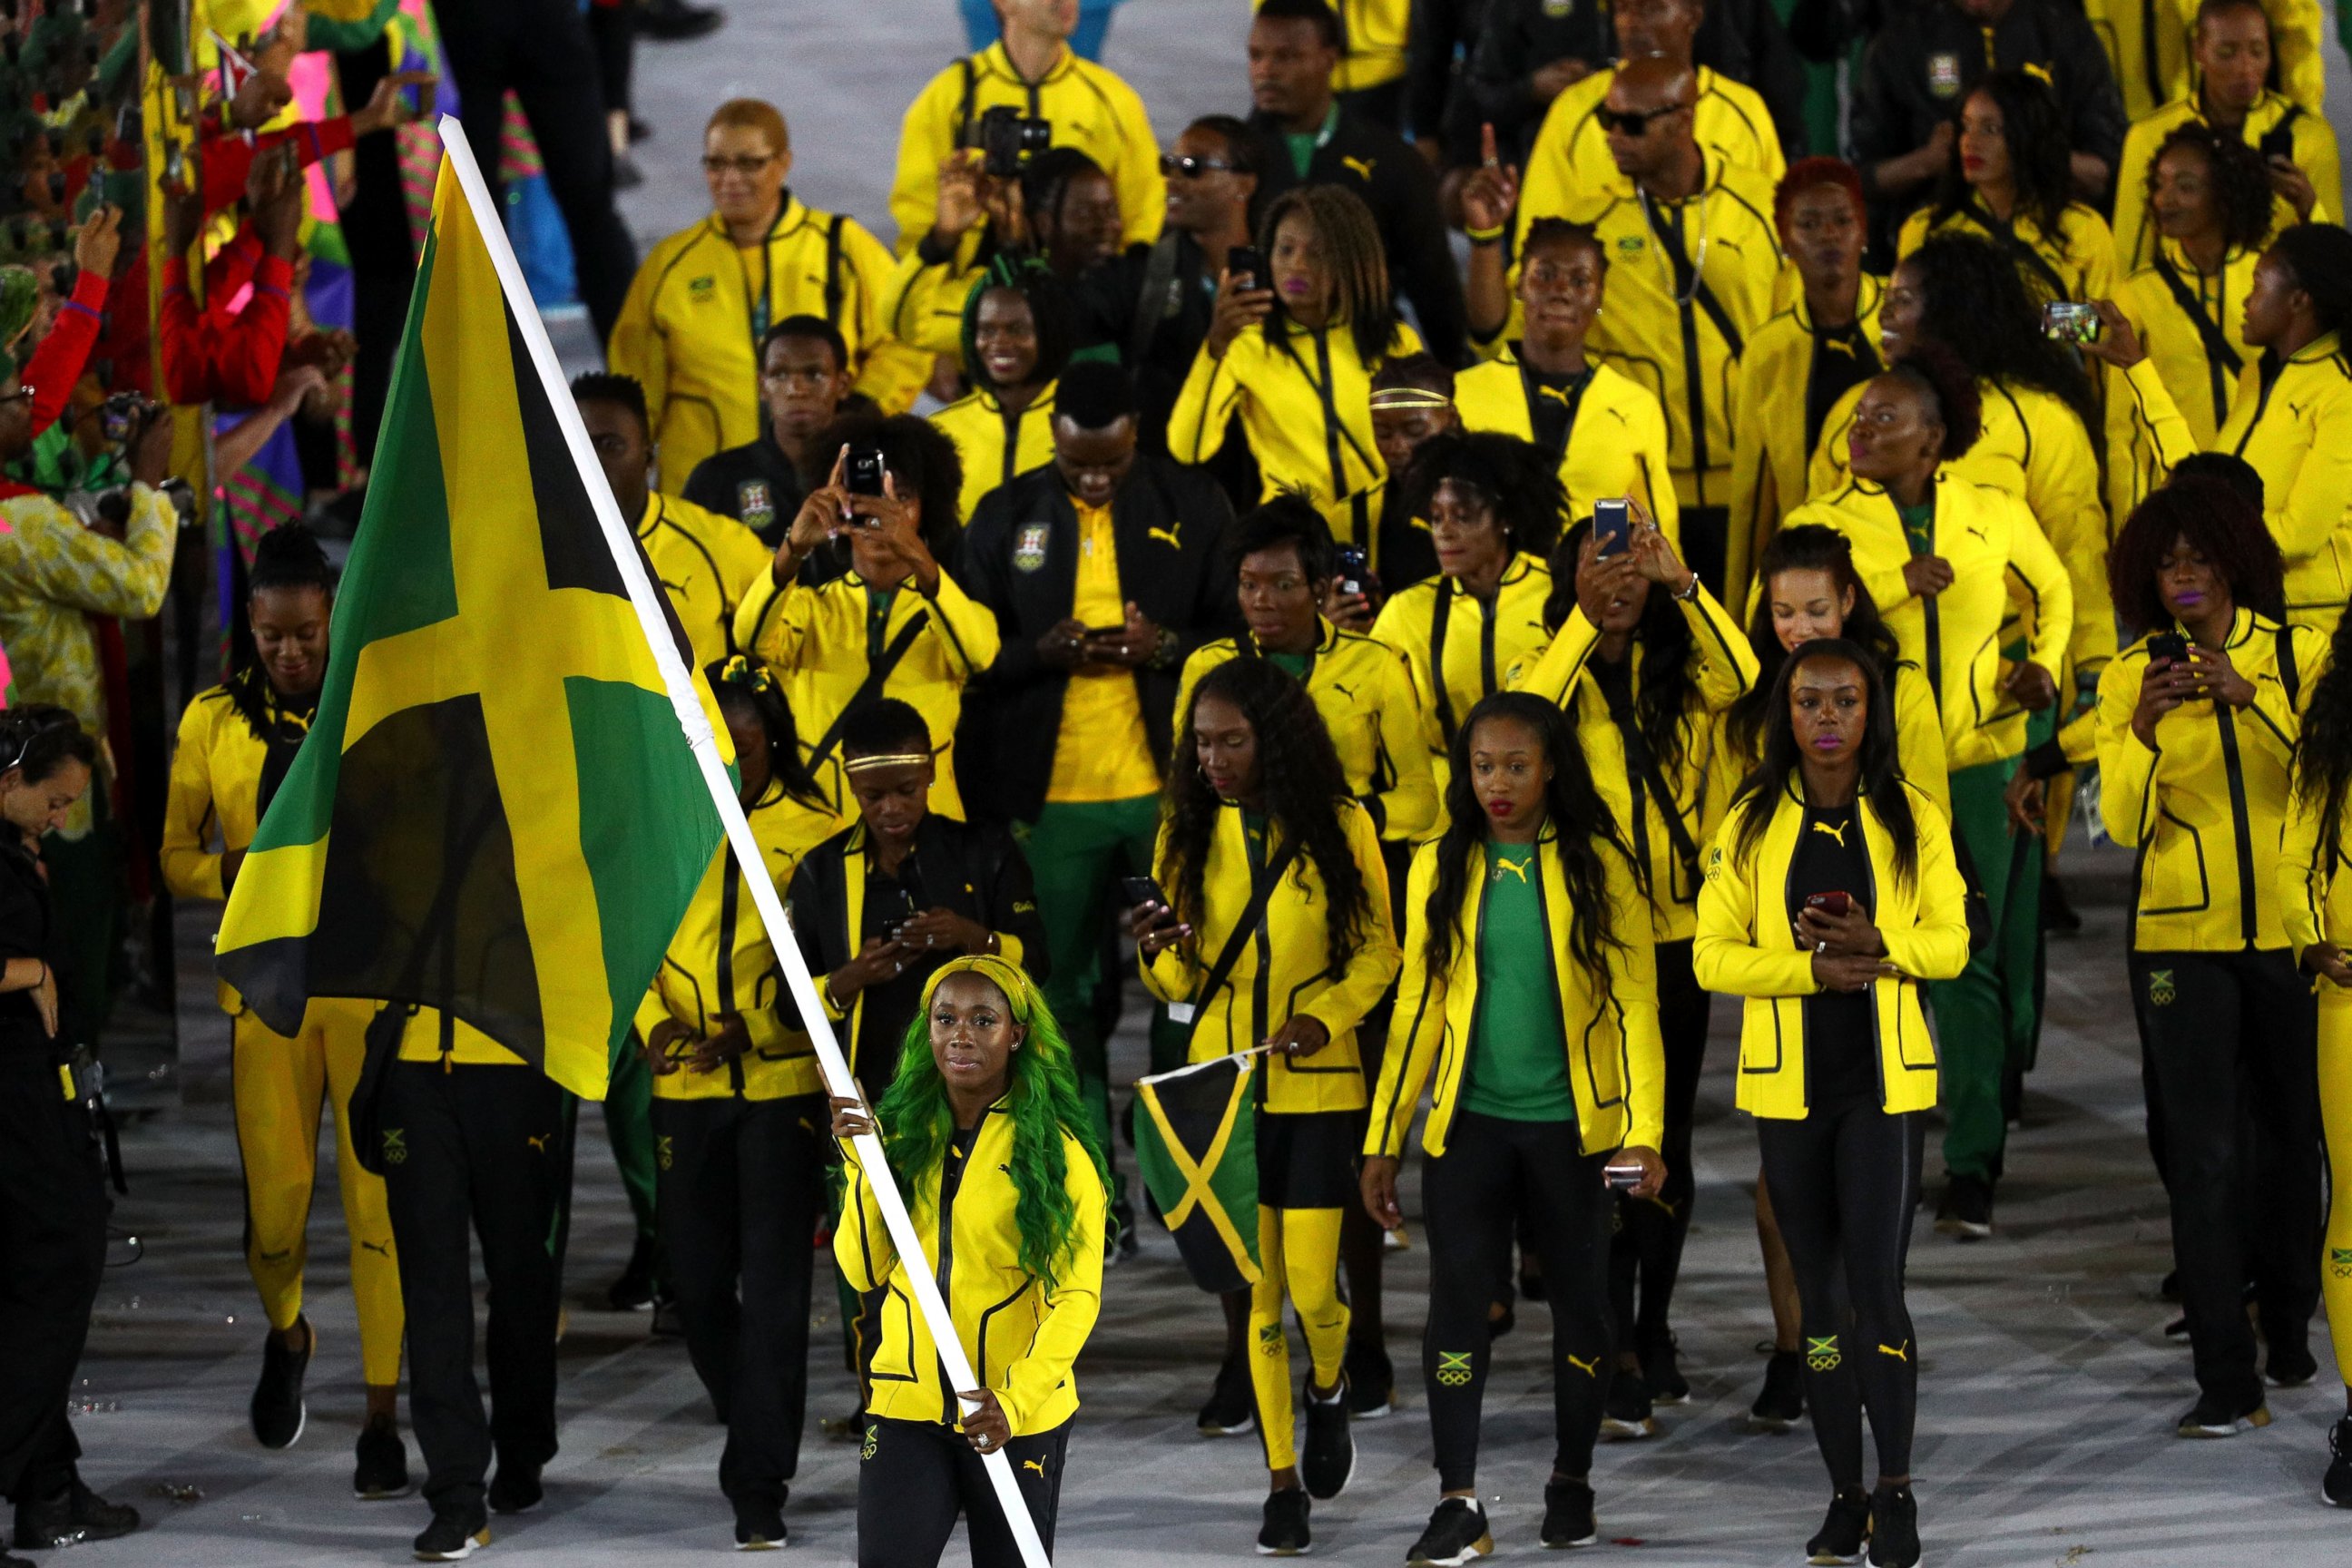 PHOTO: Flag bearer Shelly-Ann Fraser-Pryce of Jamaica leads her Olympic Team during the opening ceremony of the Rio 2016 Olympic Games at Maracana Stadium, Aug. 5, 2016 in Rio de Janeiro, Brazil.  